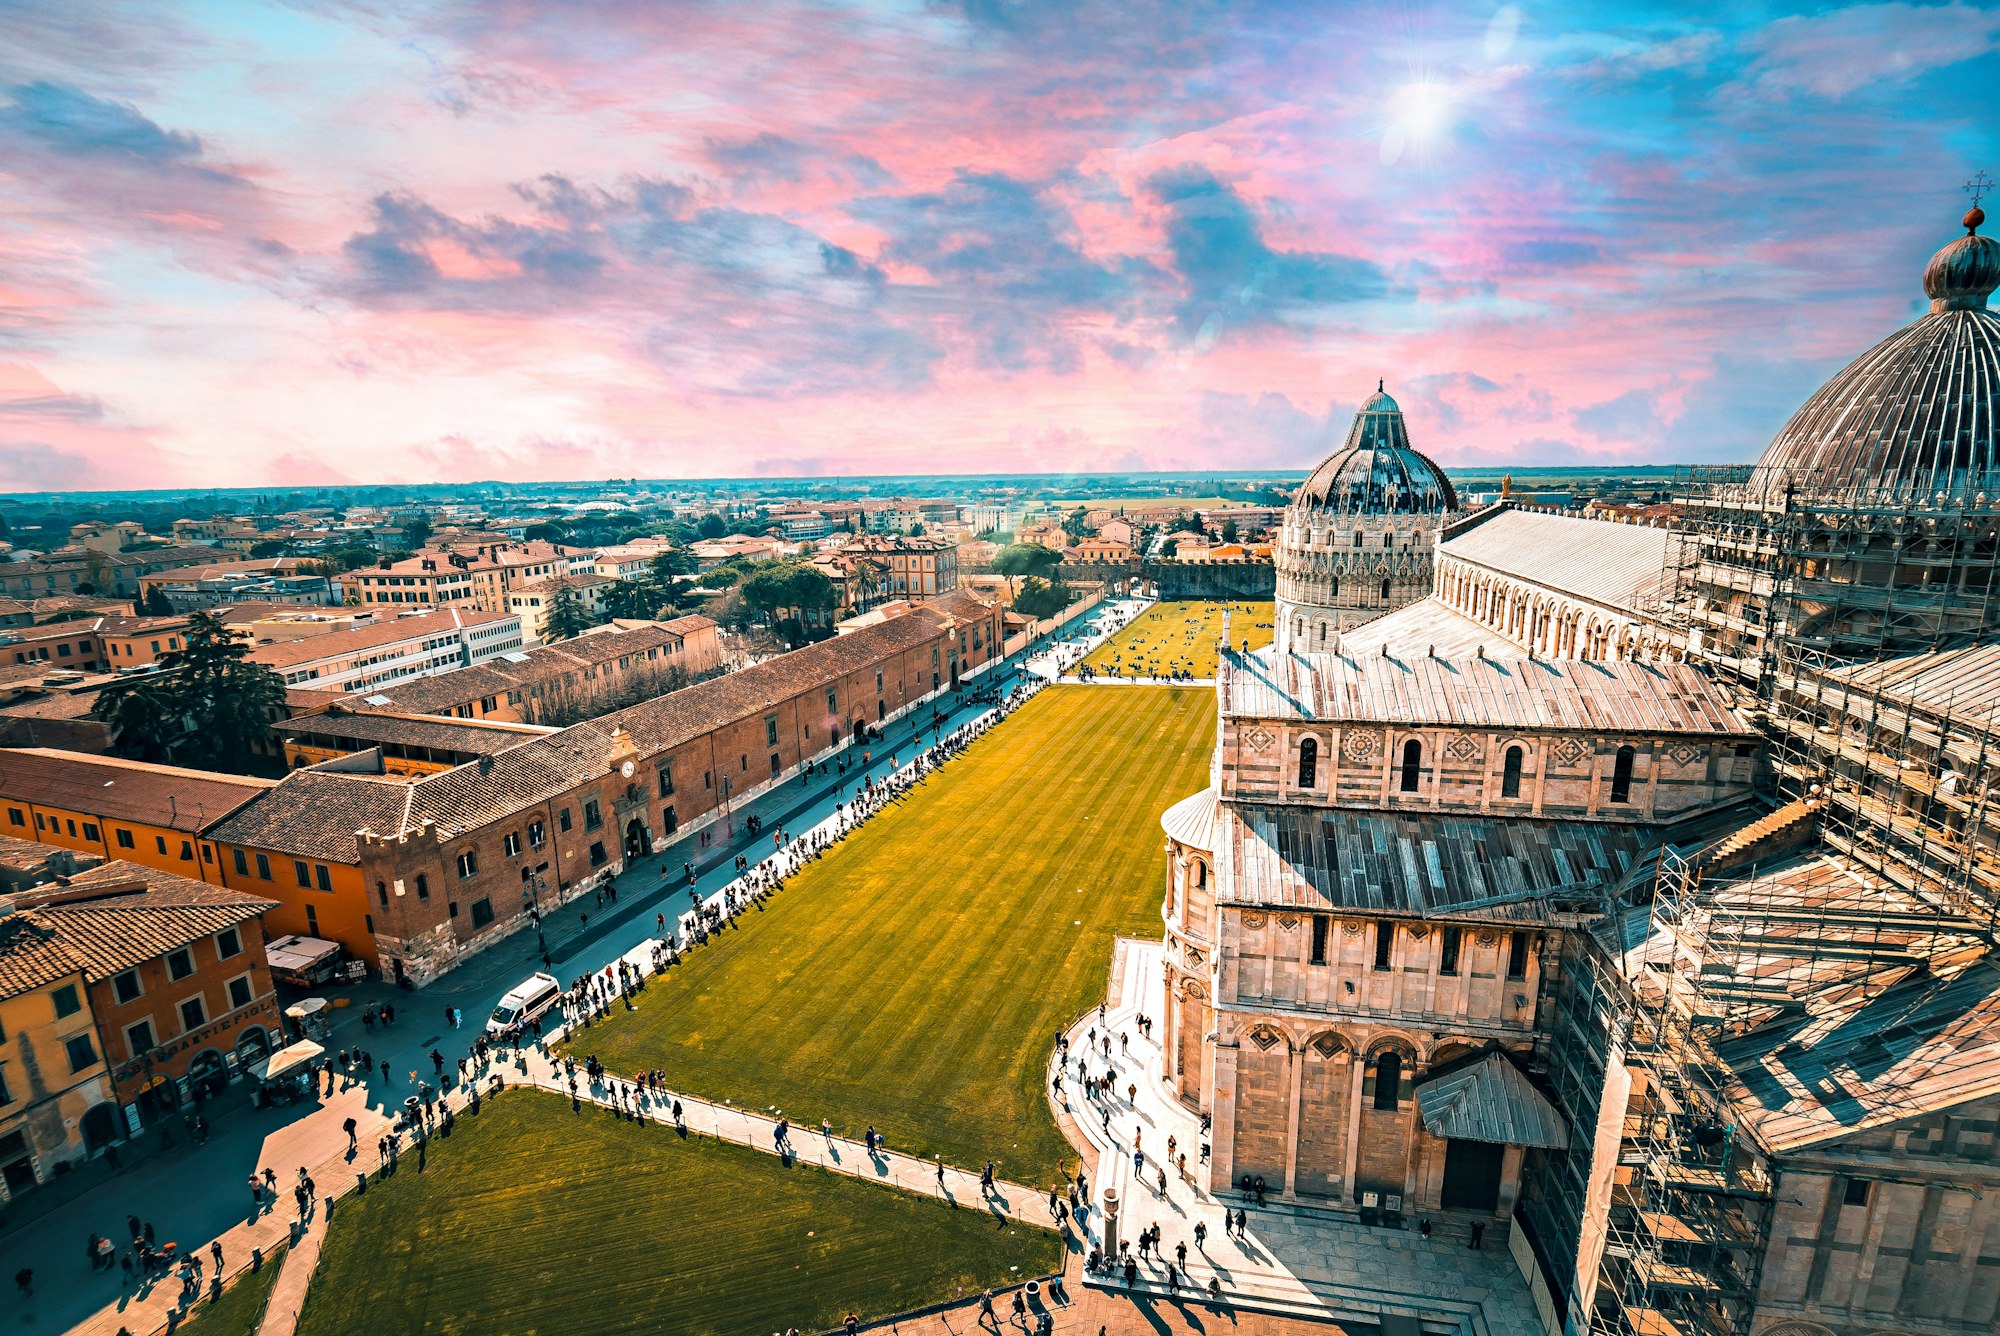 Picture of Pisa Landscape Ontop Of The Leaning Tower Of Pisa, In Pisa Italy.

Photographer: https://www.instagram.com/alttr_photography/


